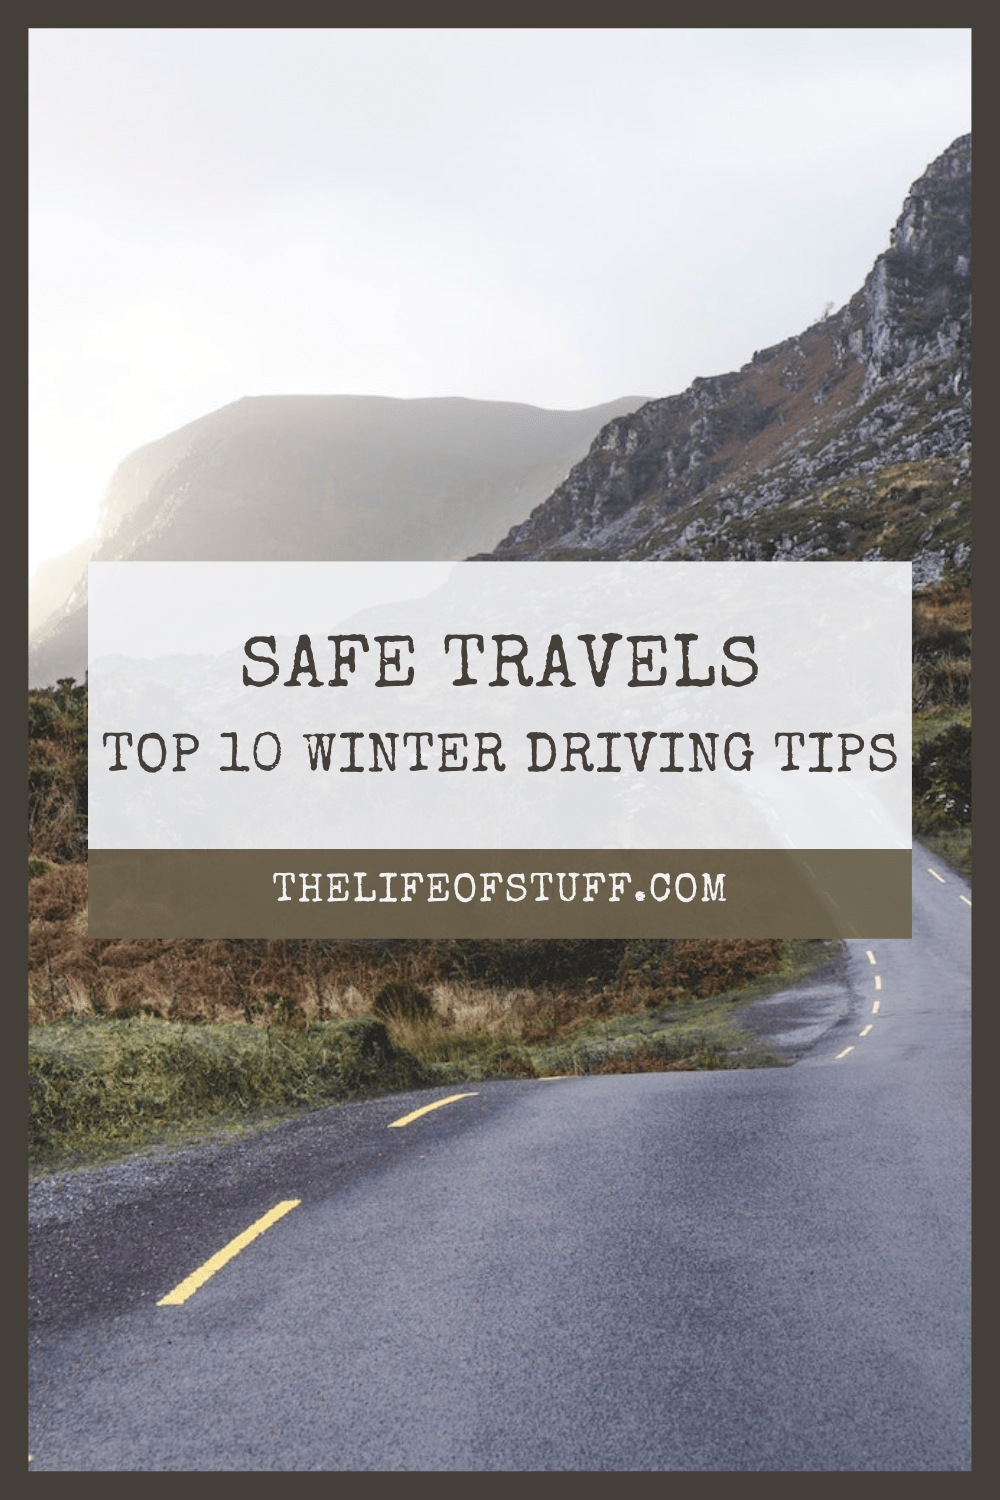 Safe Travels - Top 10 Winter Driving Tips - The Life of Stuff